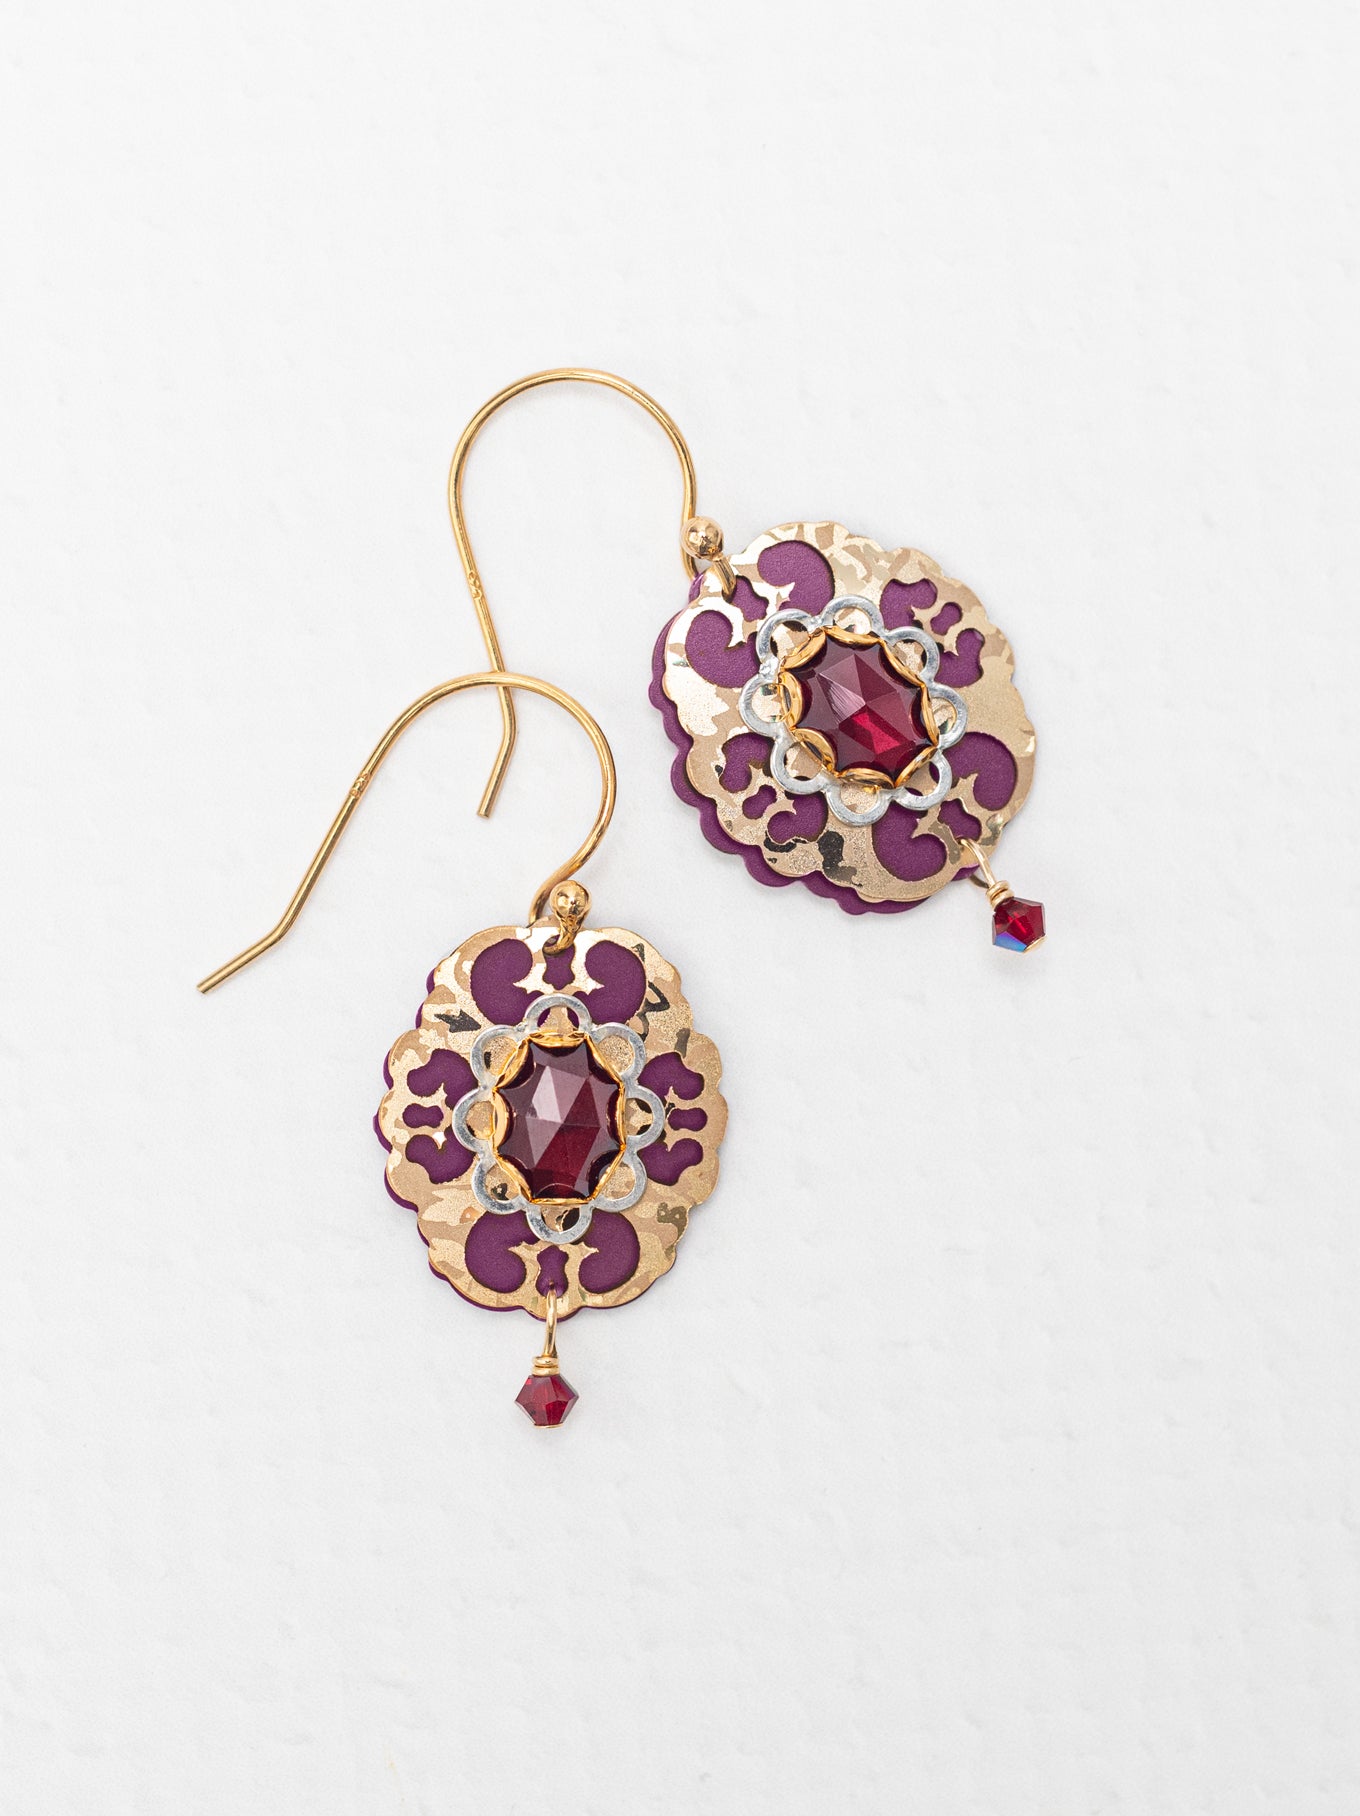 The Anastasia Earrings feature filigree and a crystal gemstone. – Holly ...